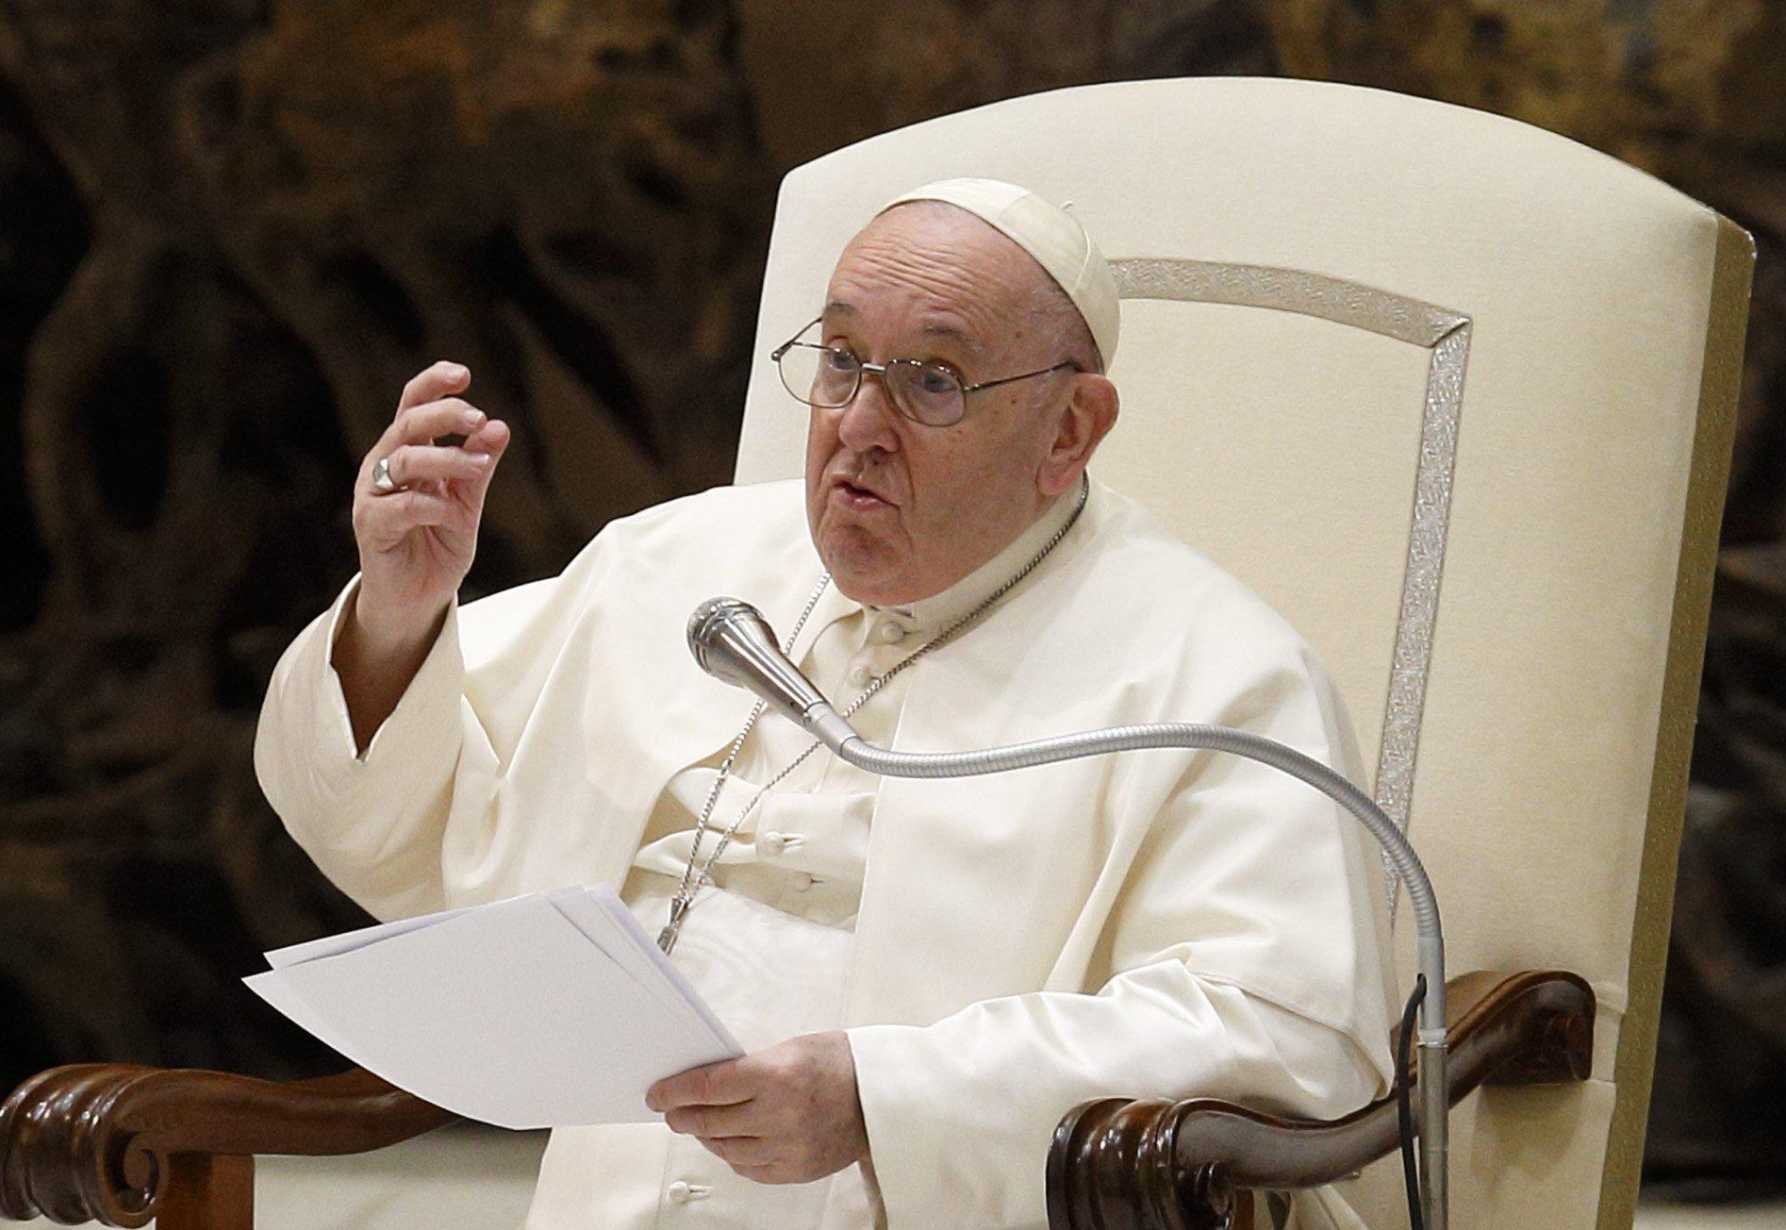 To be pastoral, look to the Good Shepherd, pope says